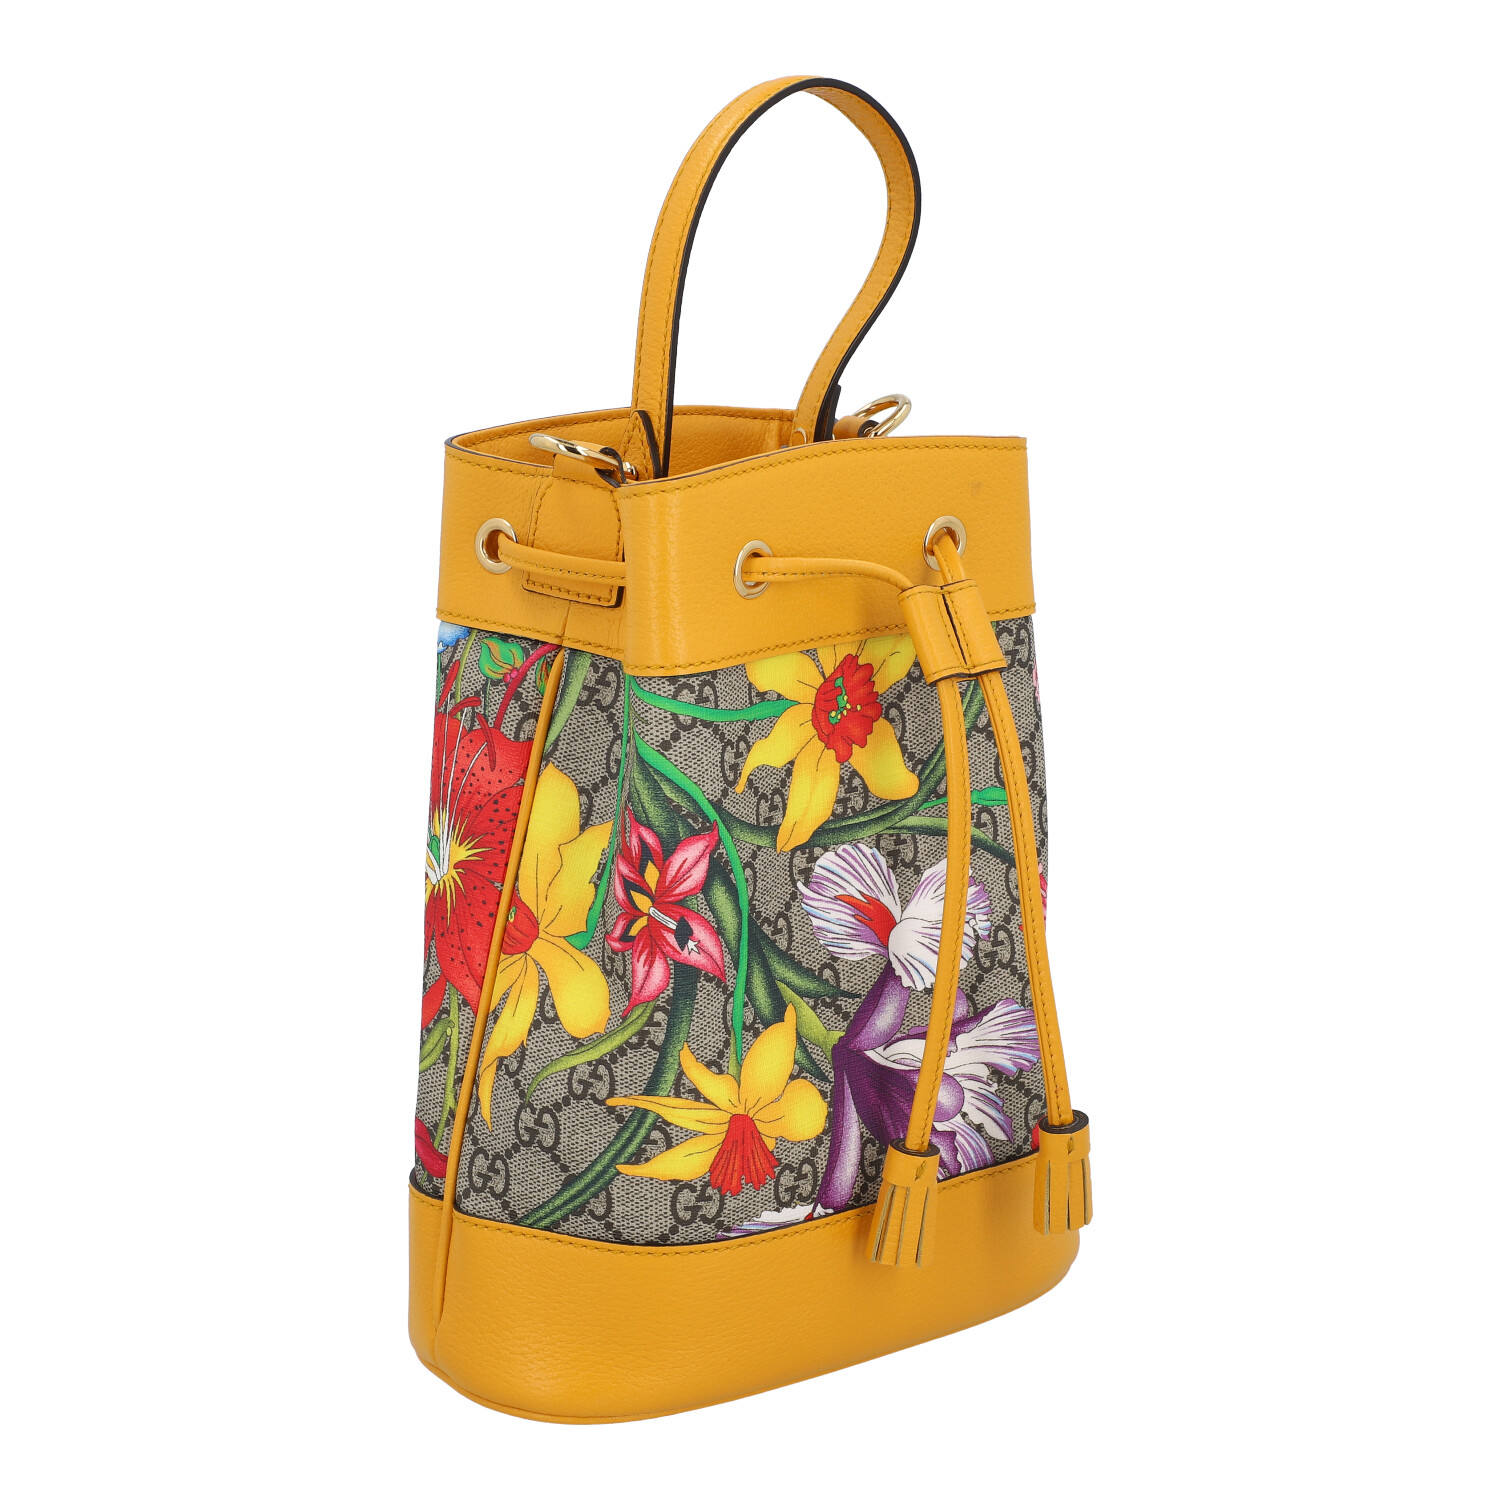 GUCCI Beuteltasche "OPHIDIA BUCKET BAG". - Image 2 of 8